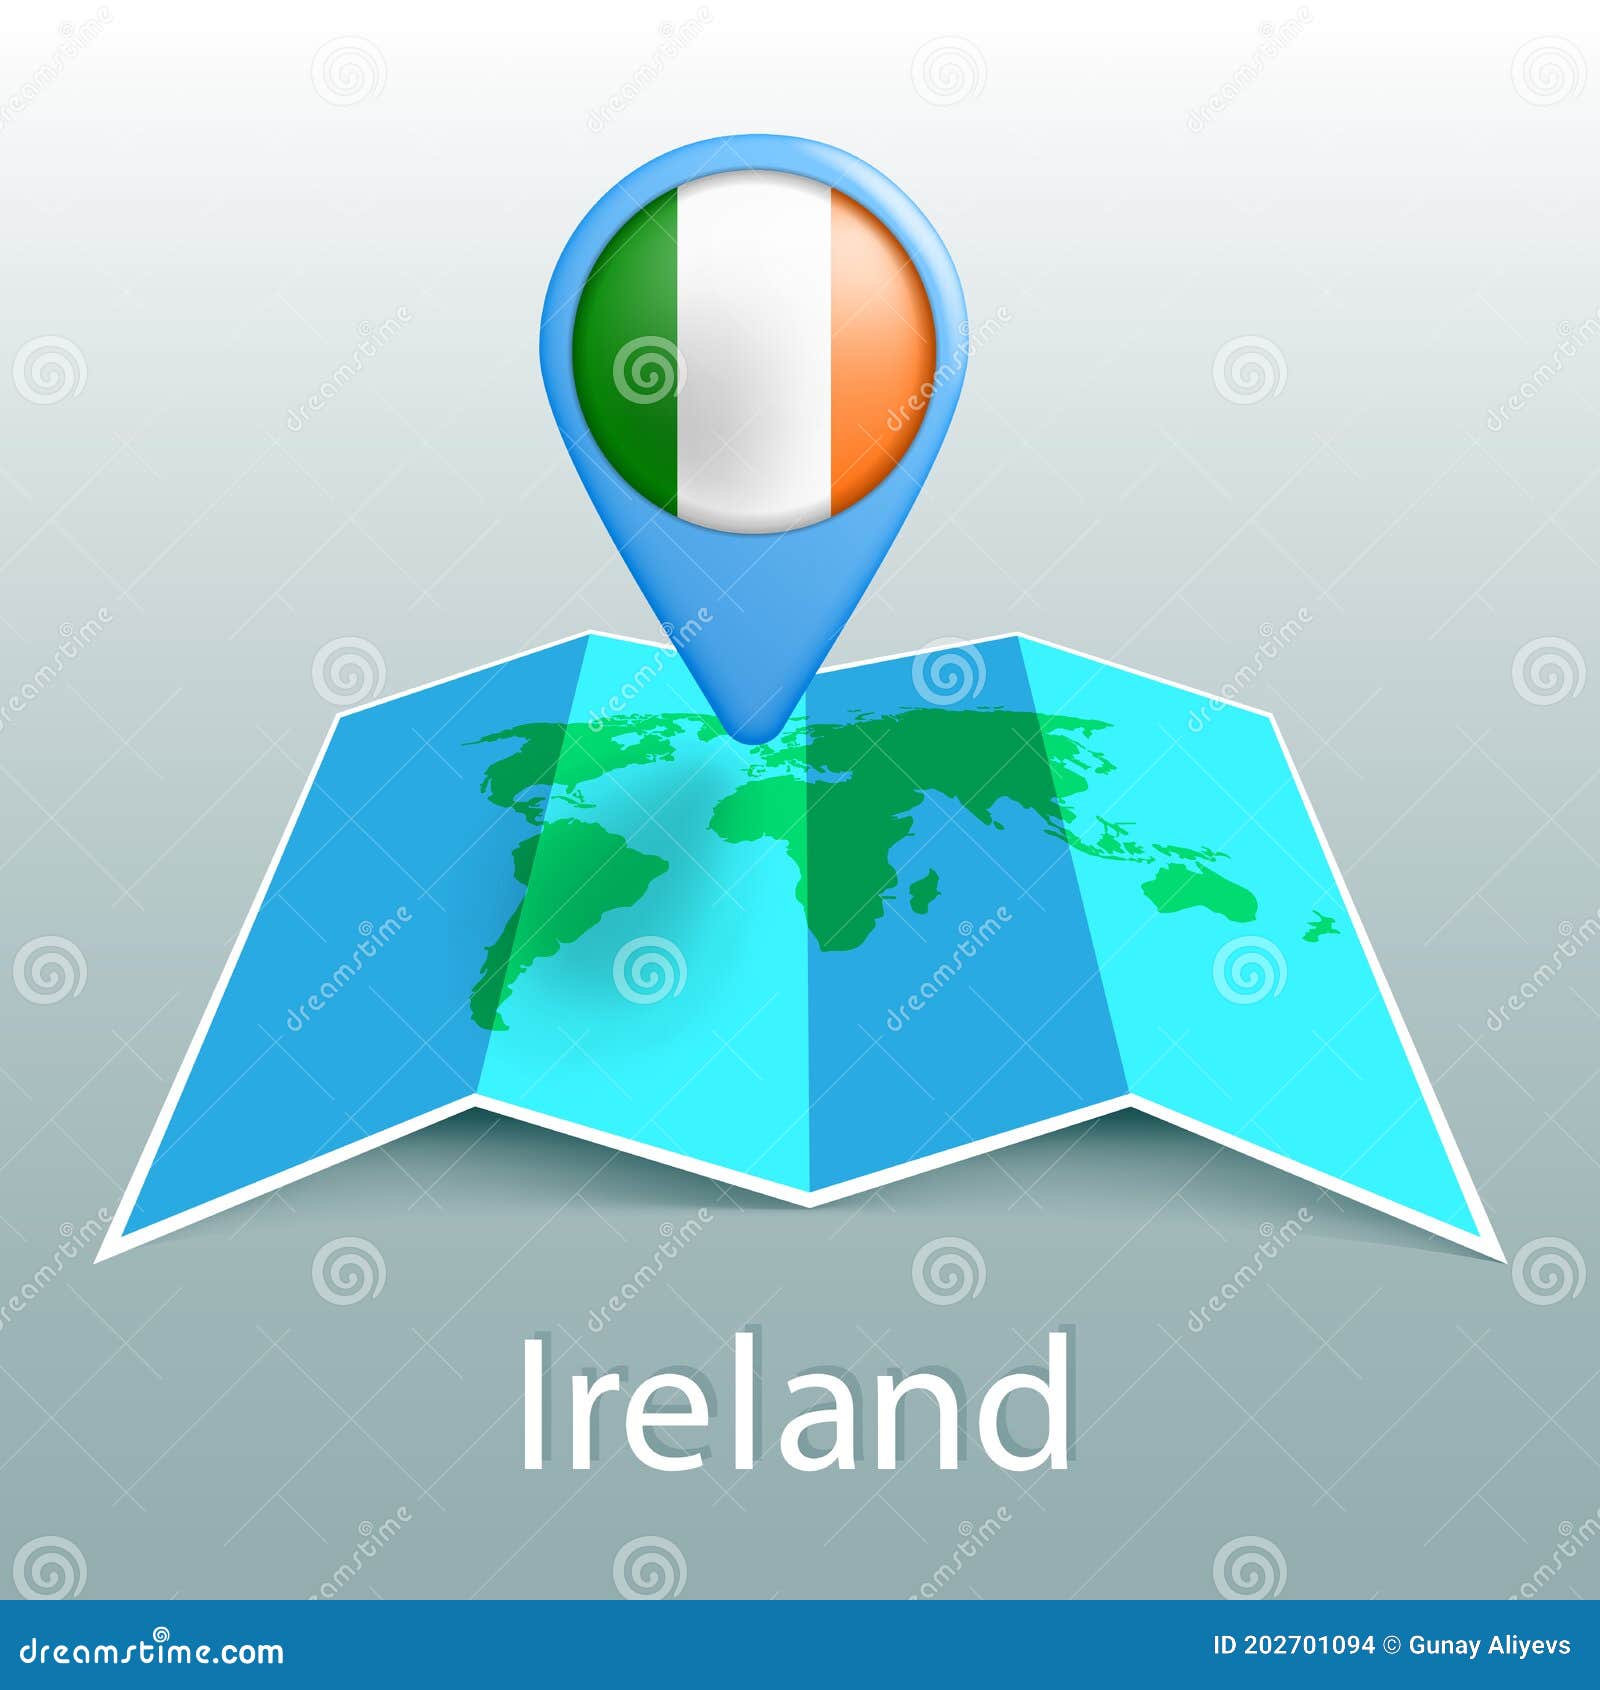 Ireland Flag World Map Pin Name Country Gray Background 202701094 